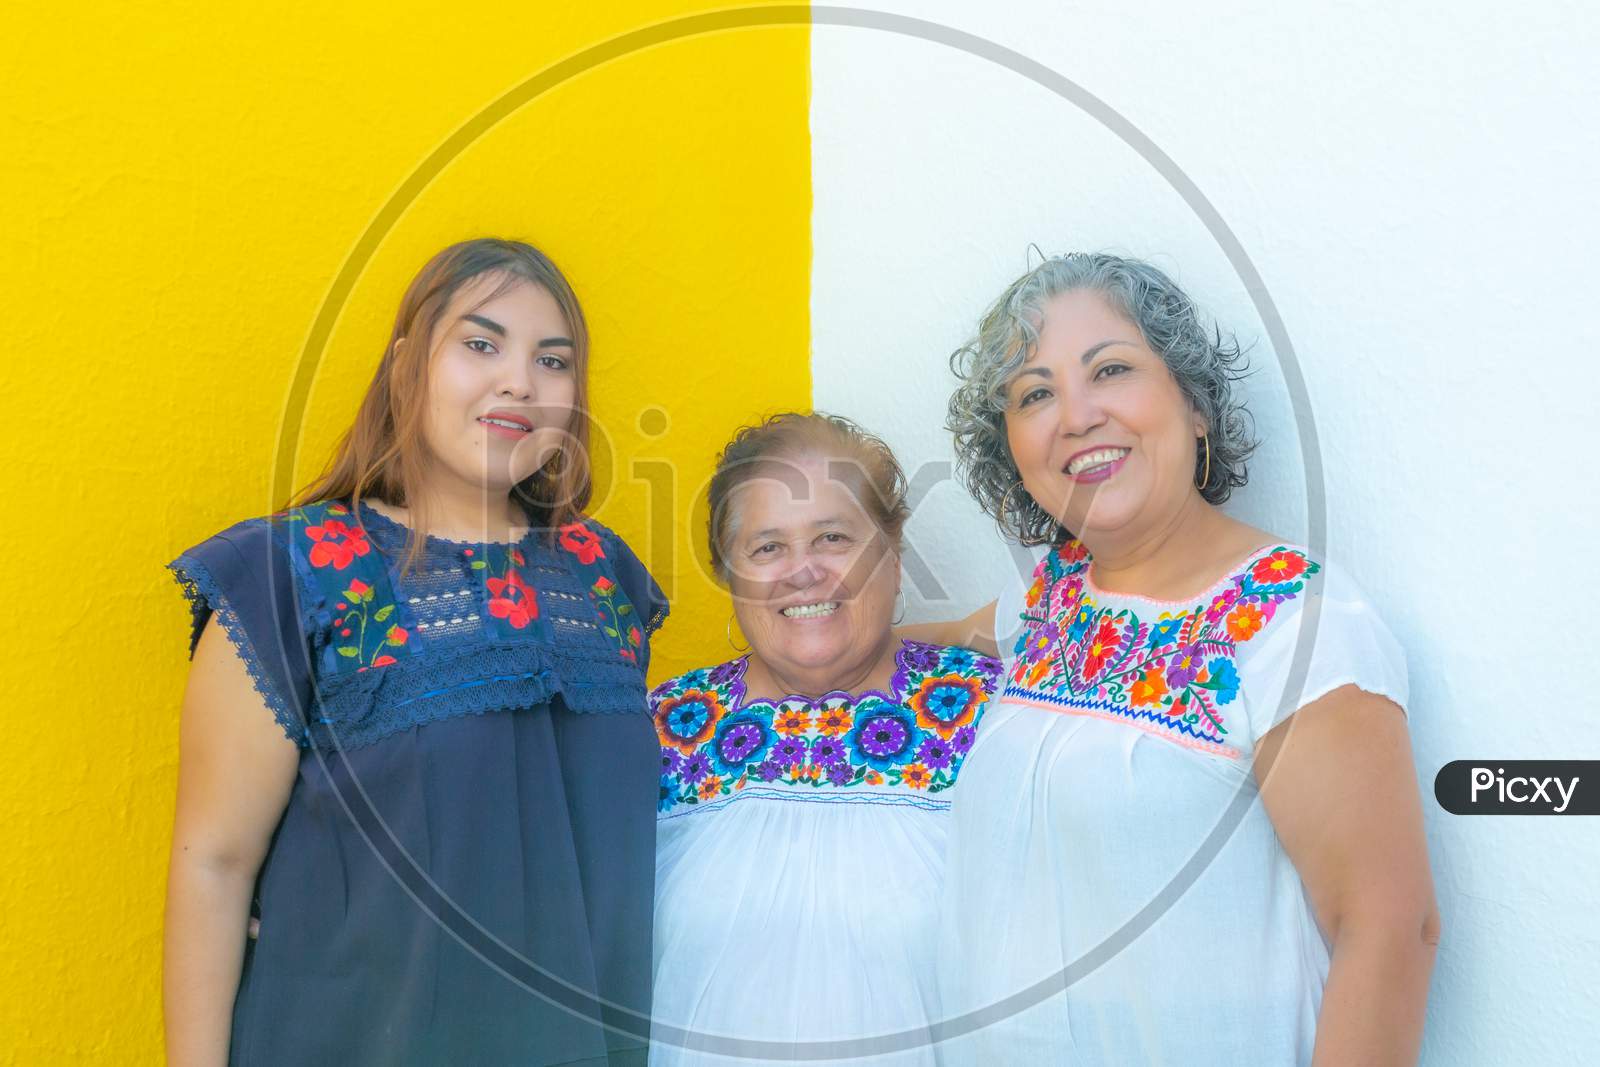 Grandmother Between Daughter And Granddaughter Very Cheerful, Three Generations Of Mexican Women Smiling With Floral Printed Blouses On A White And Yellow Background